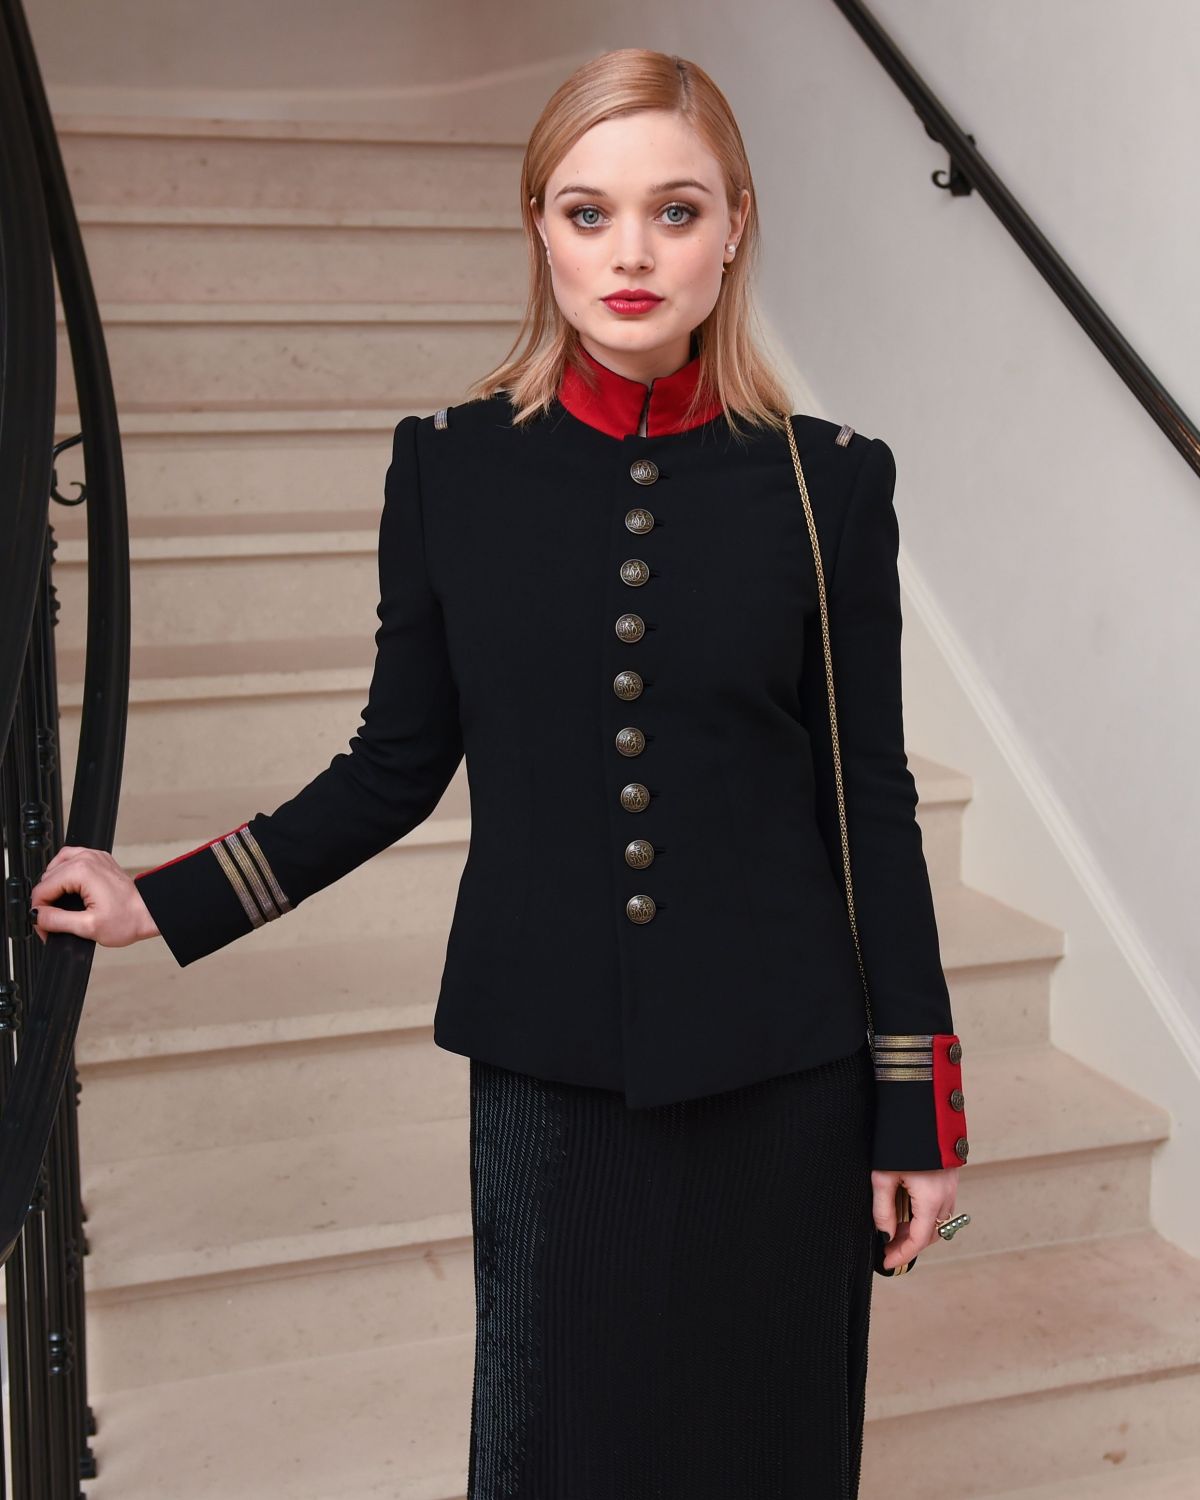 BELLA HEATHCOTE at Ralph Lauren and Vogue: Celebrate Iconic Style Event in Los Angeles 11/09/2016